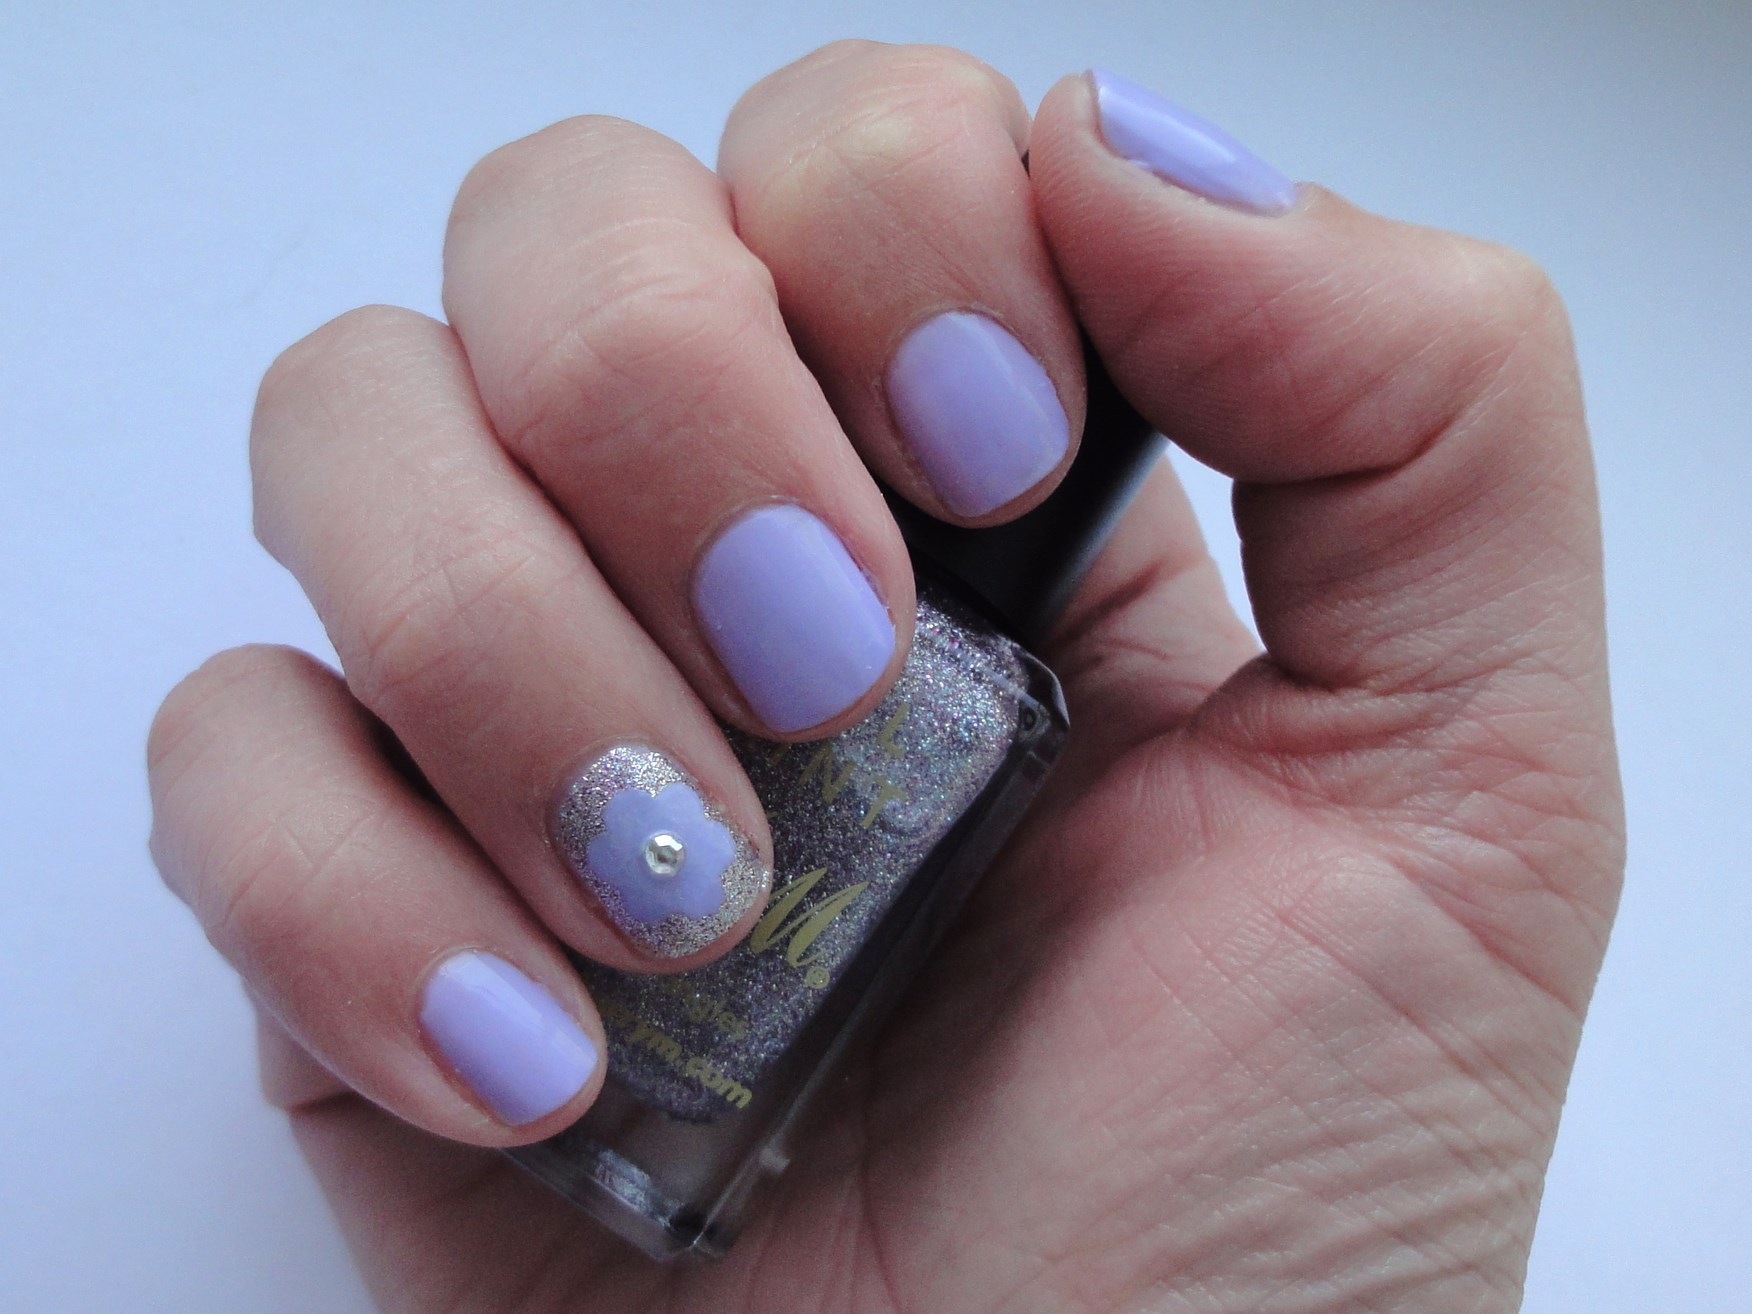 1. Lilac and White Floral Nail Art - wide 4